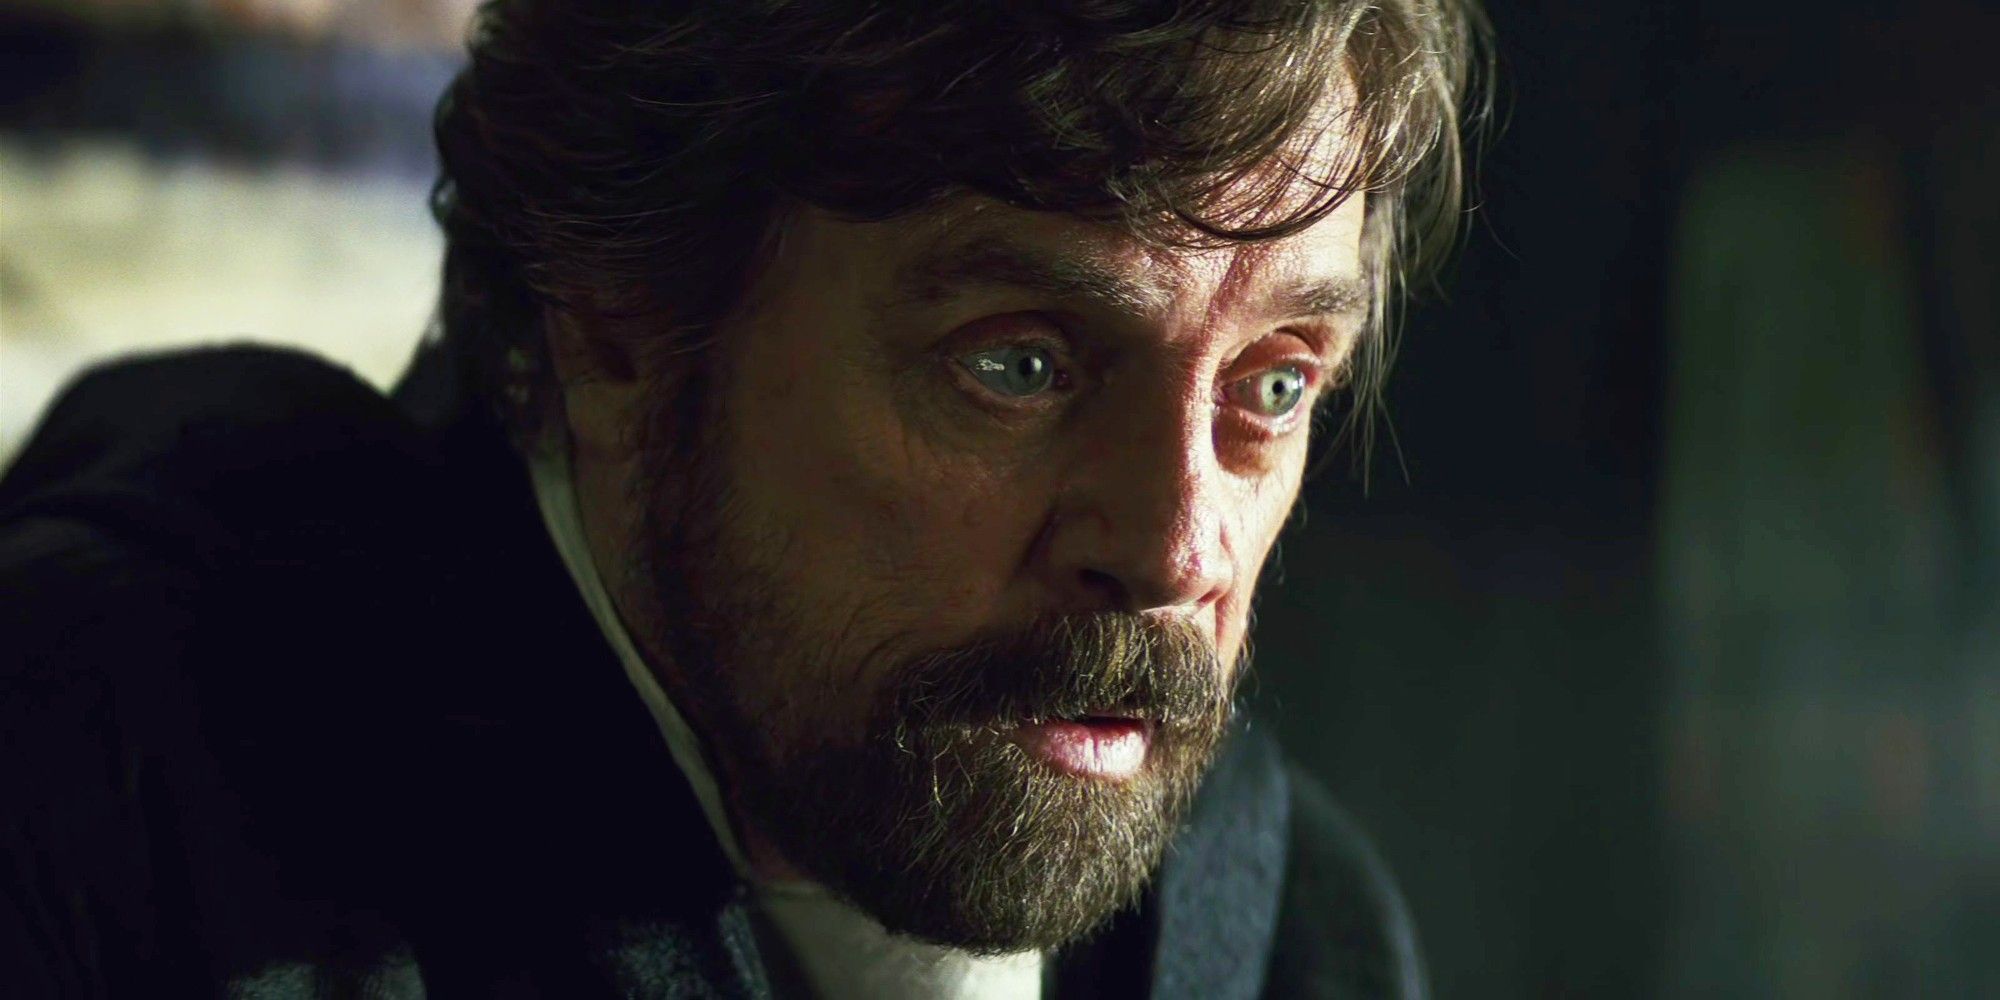 Mark Hamill Weighs In on How to Correctly Pronounce Star Wars Names